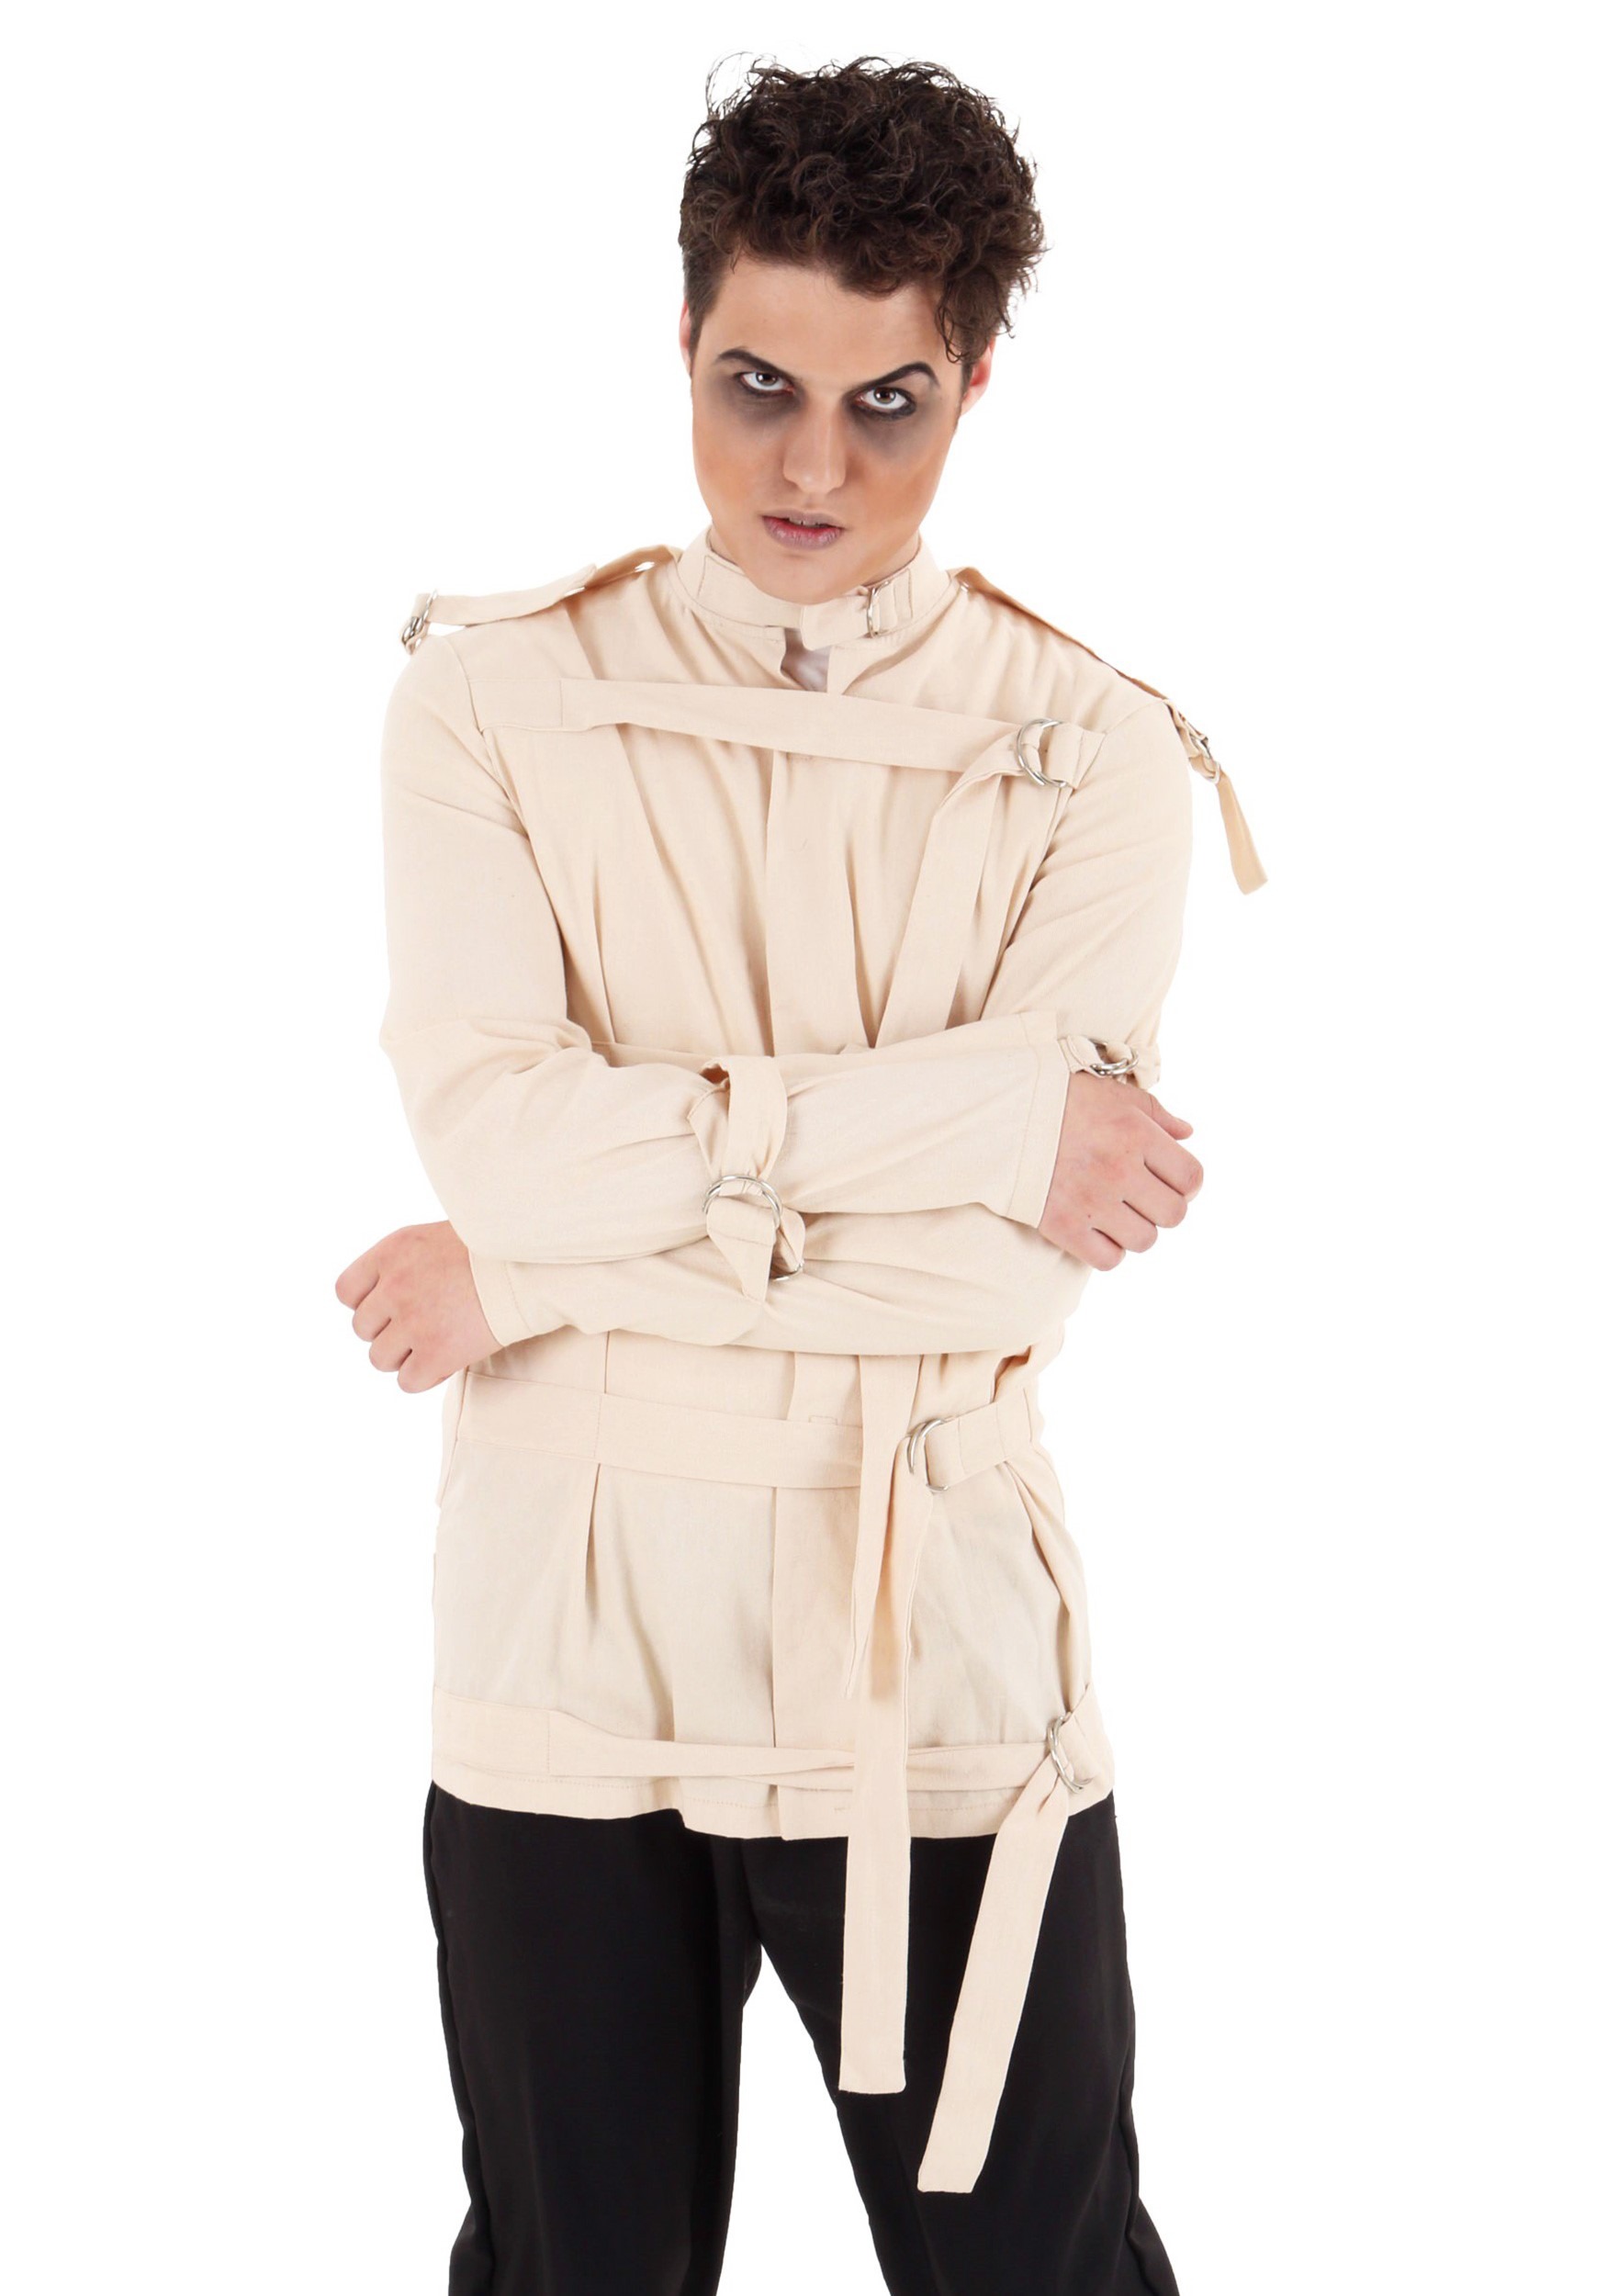 Plus Size Straight Jacket Costume for Men